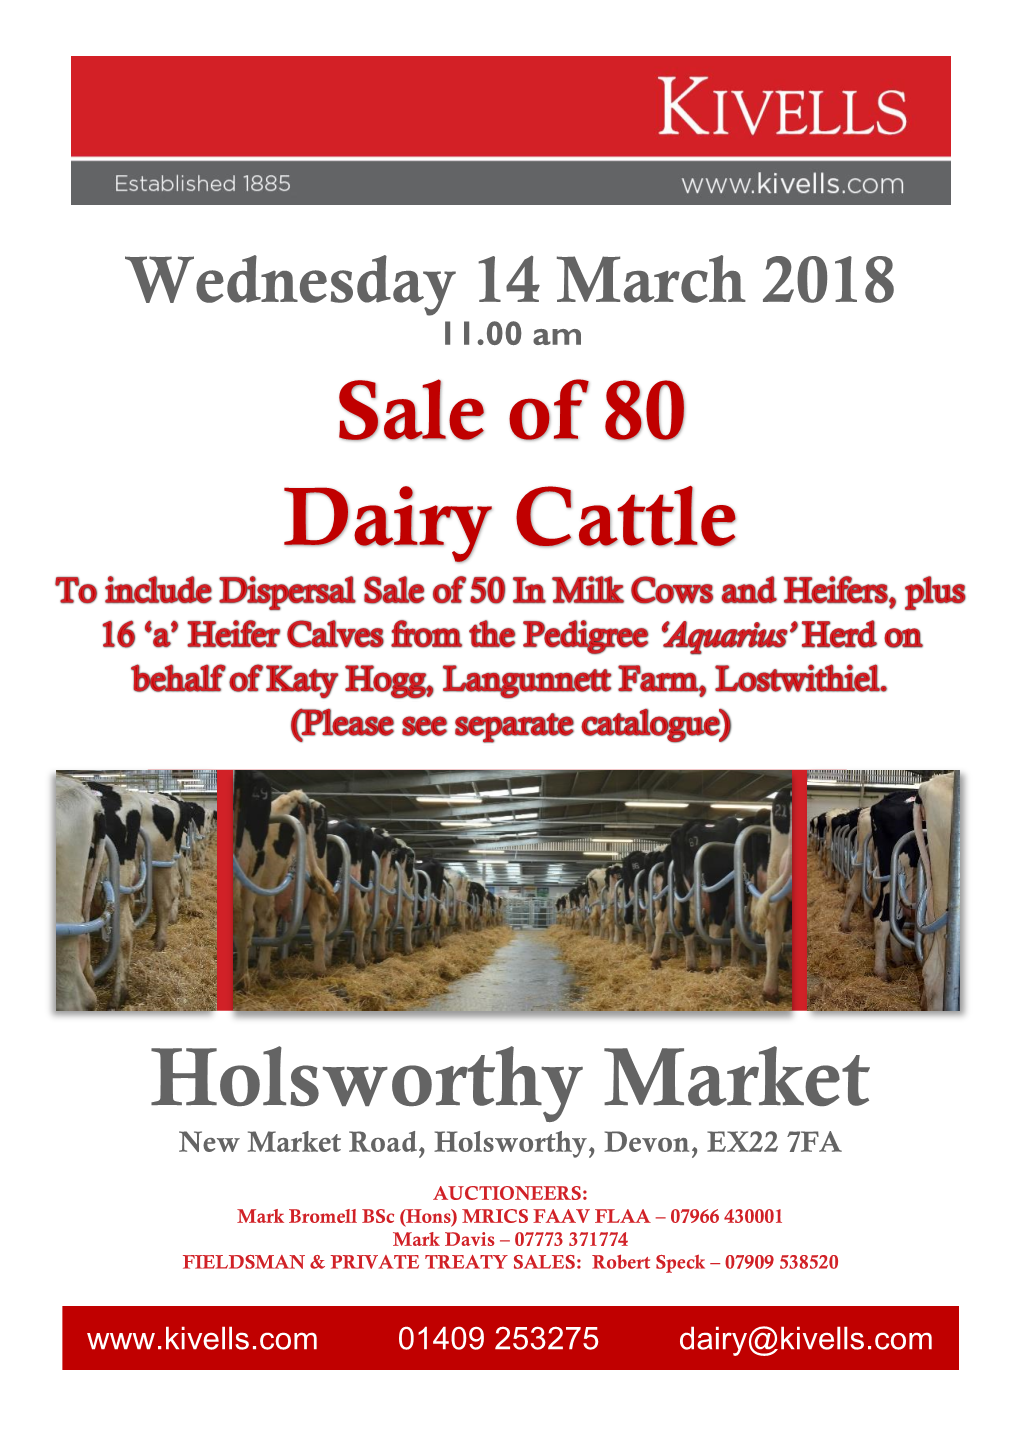 Sale of 80 Dairy Cattle Holsworthy Market